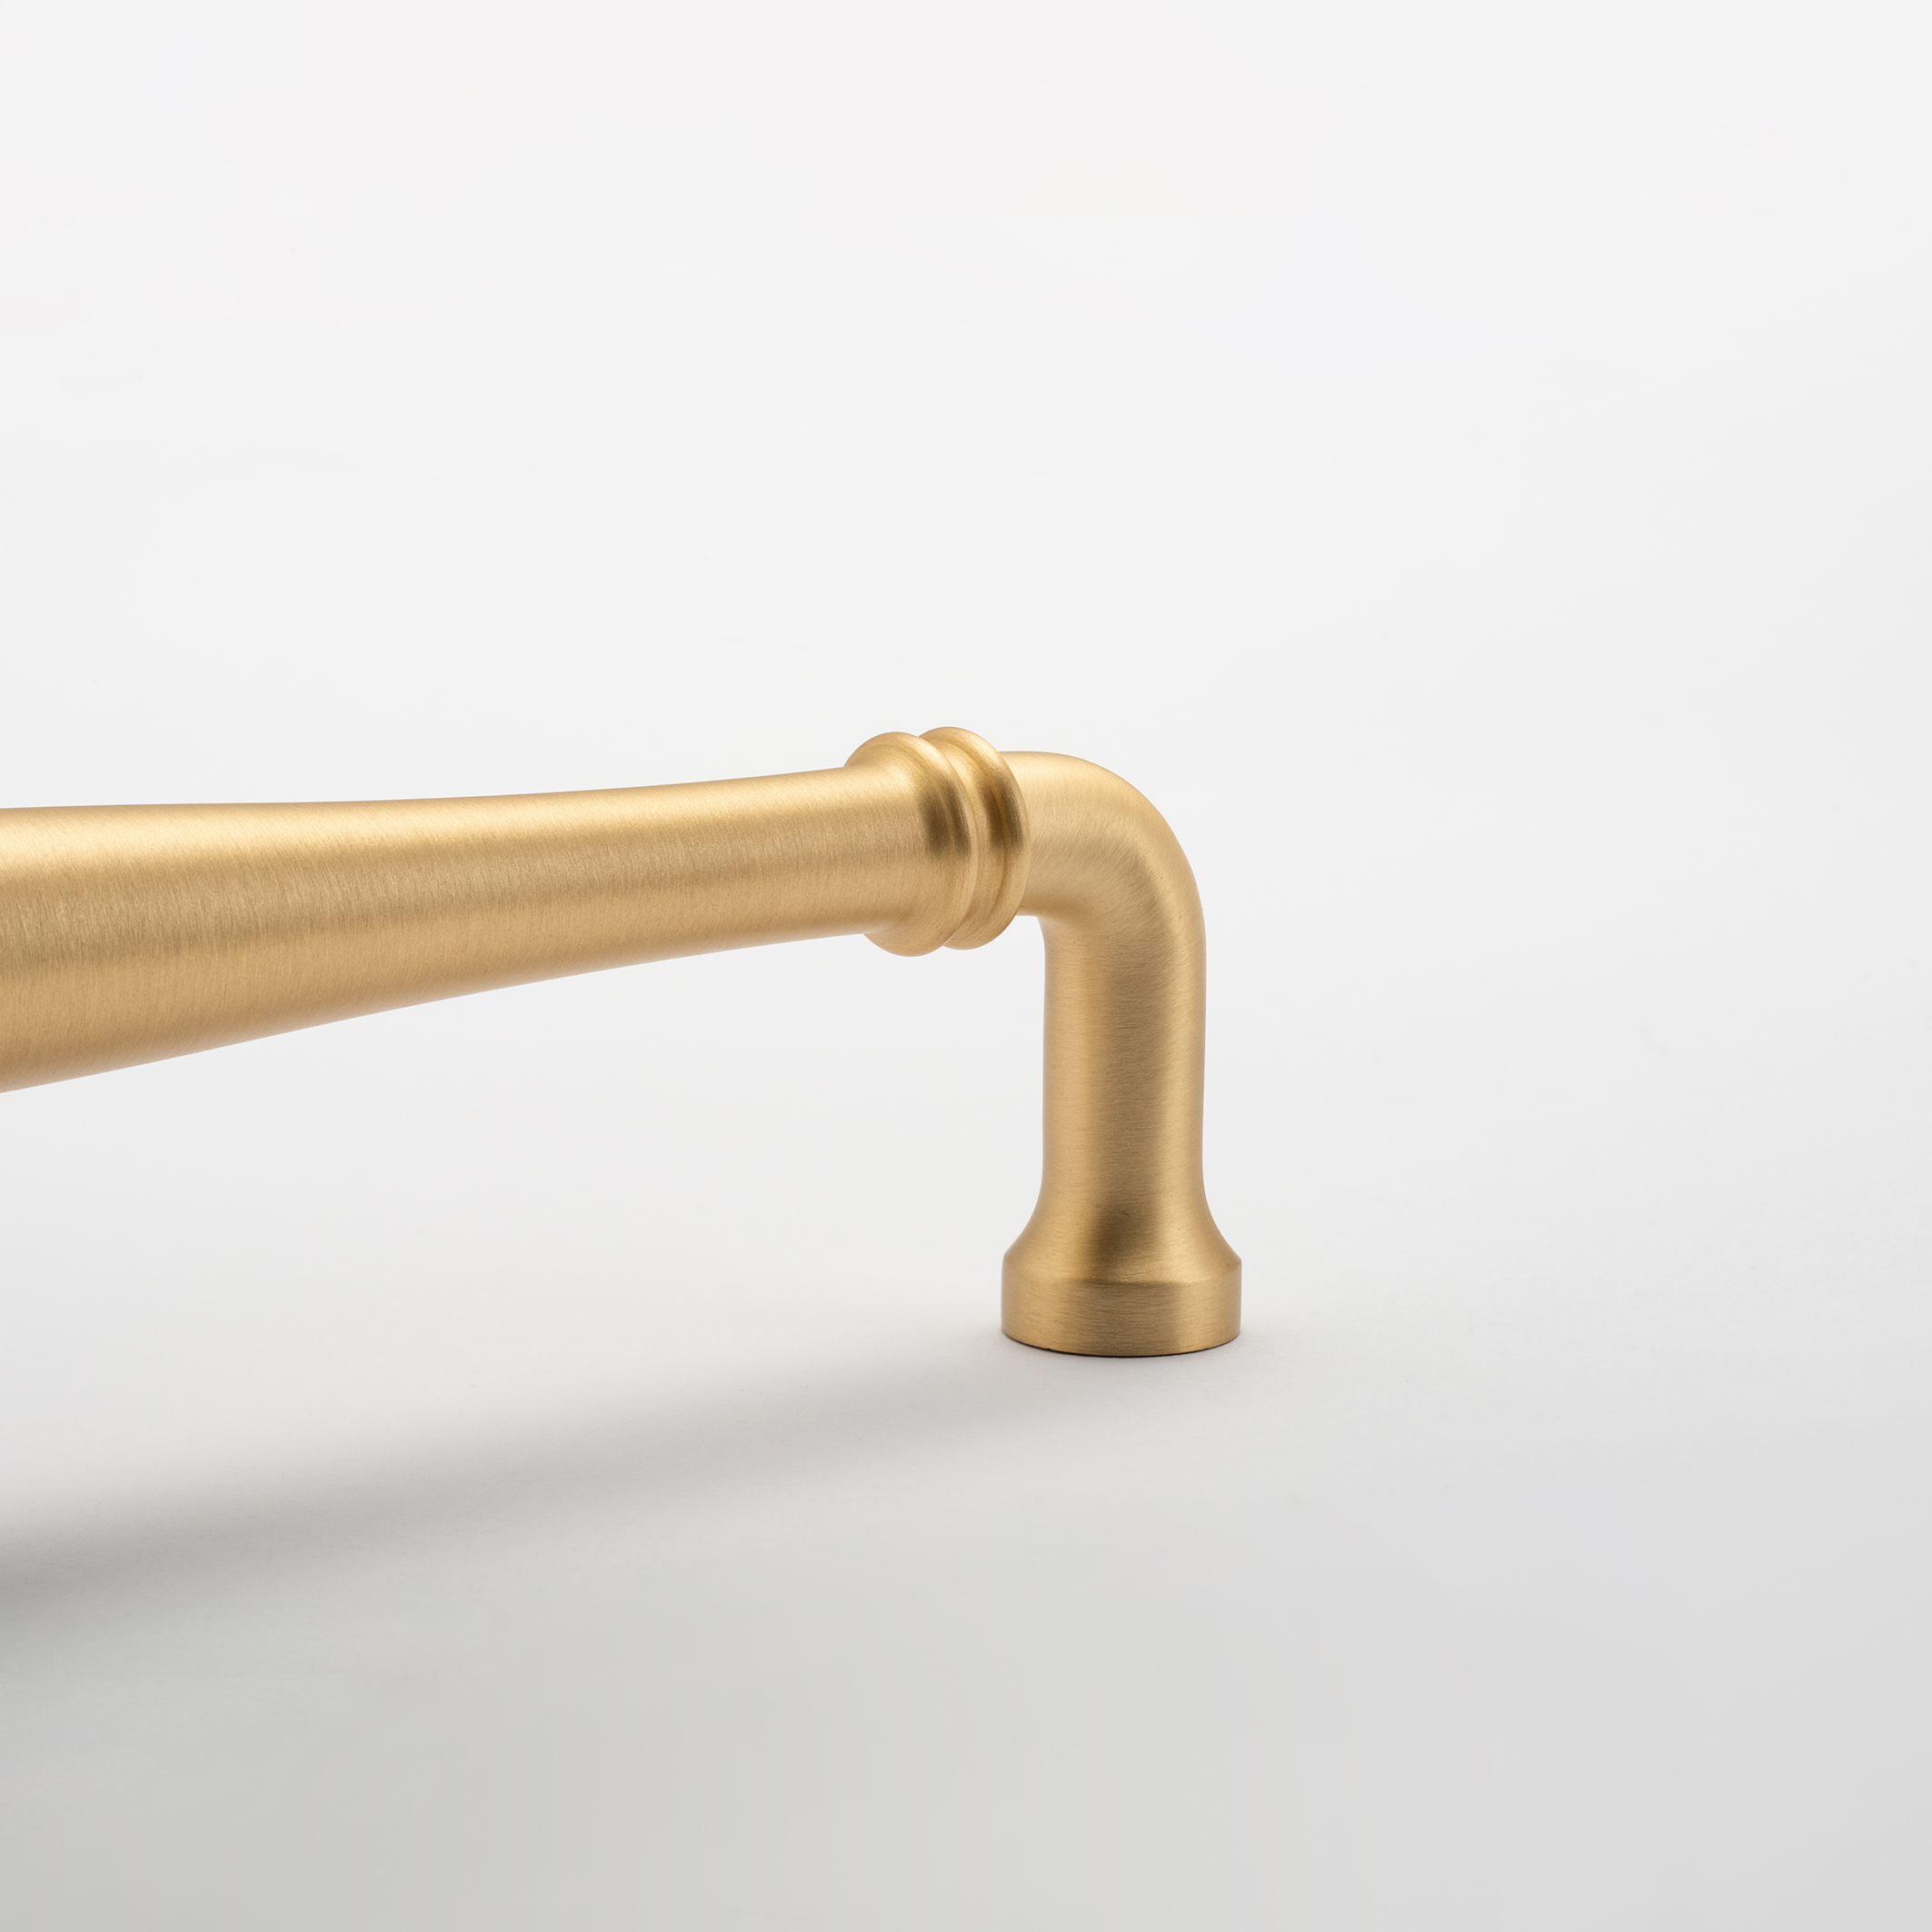 21086B - Sarlat Cabinet Pull with Backplate - CTC256mm - Brushed Brass